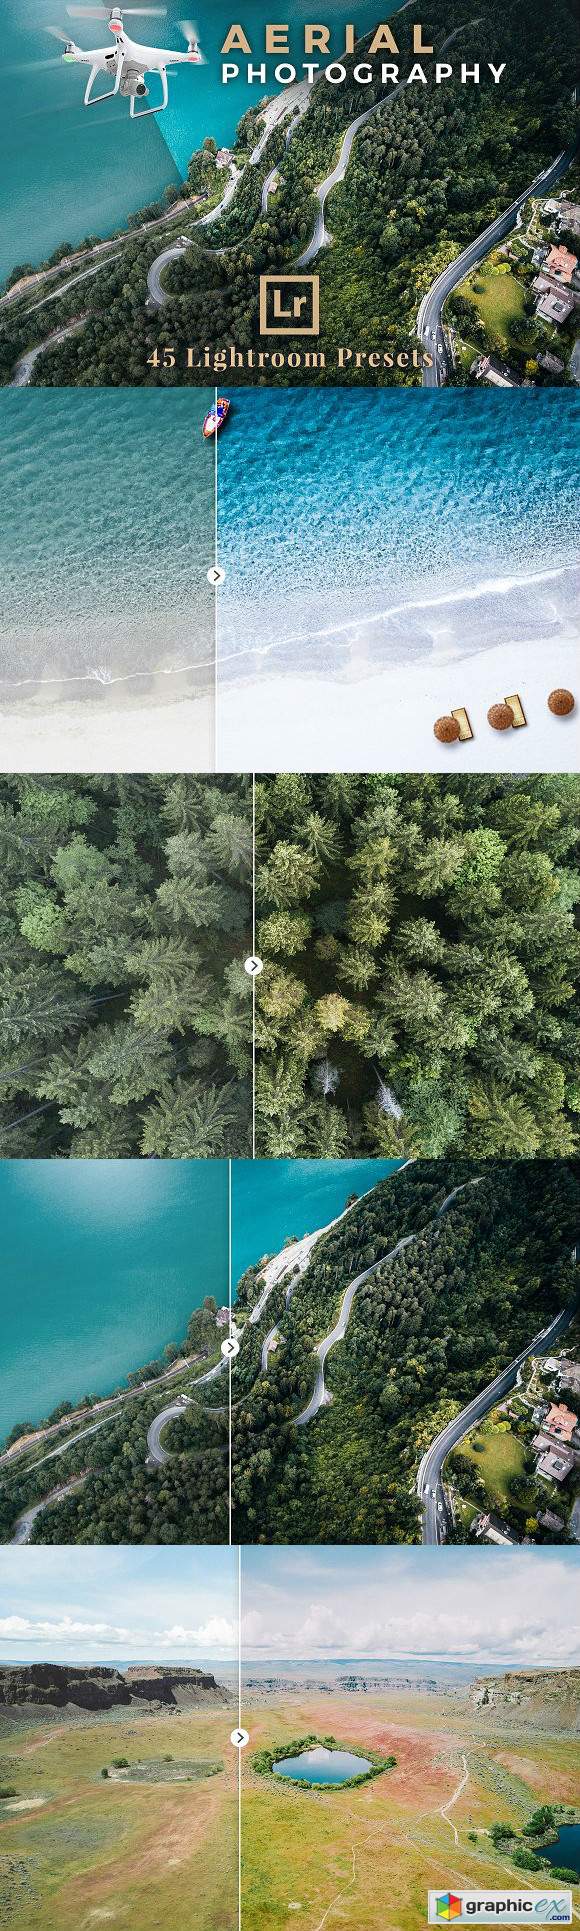 Aerial Photography Lightroom Presets